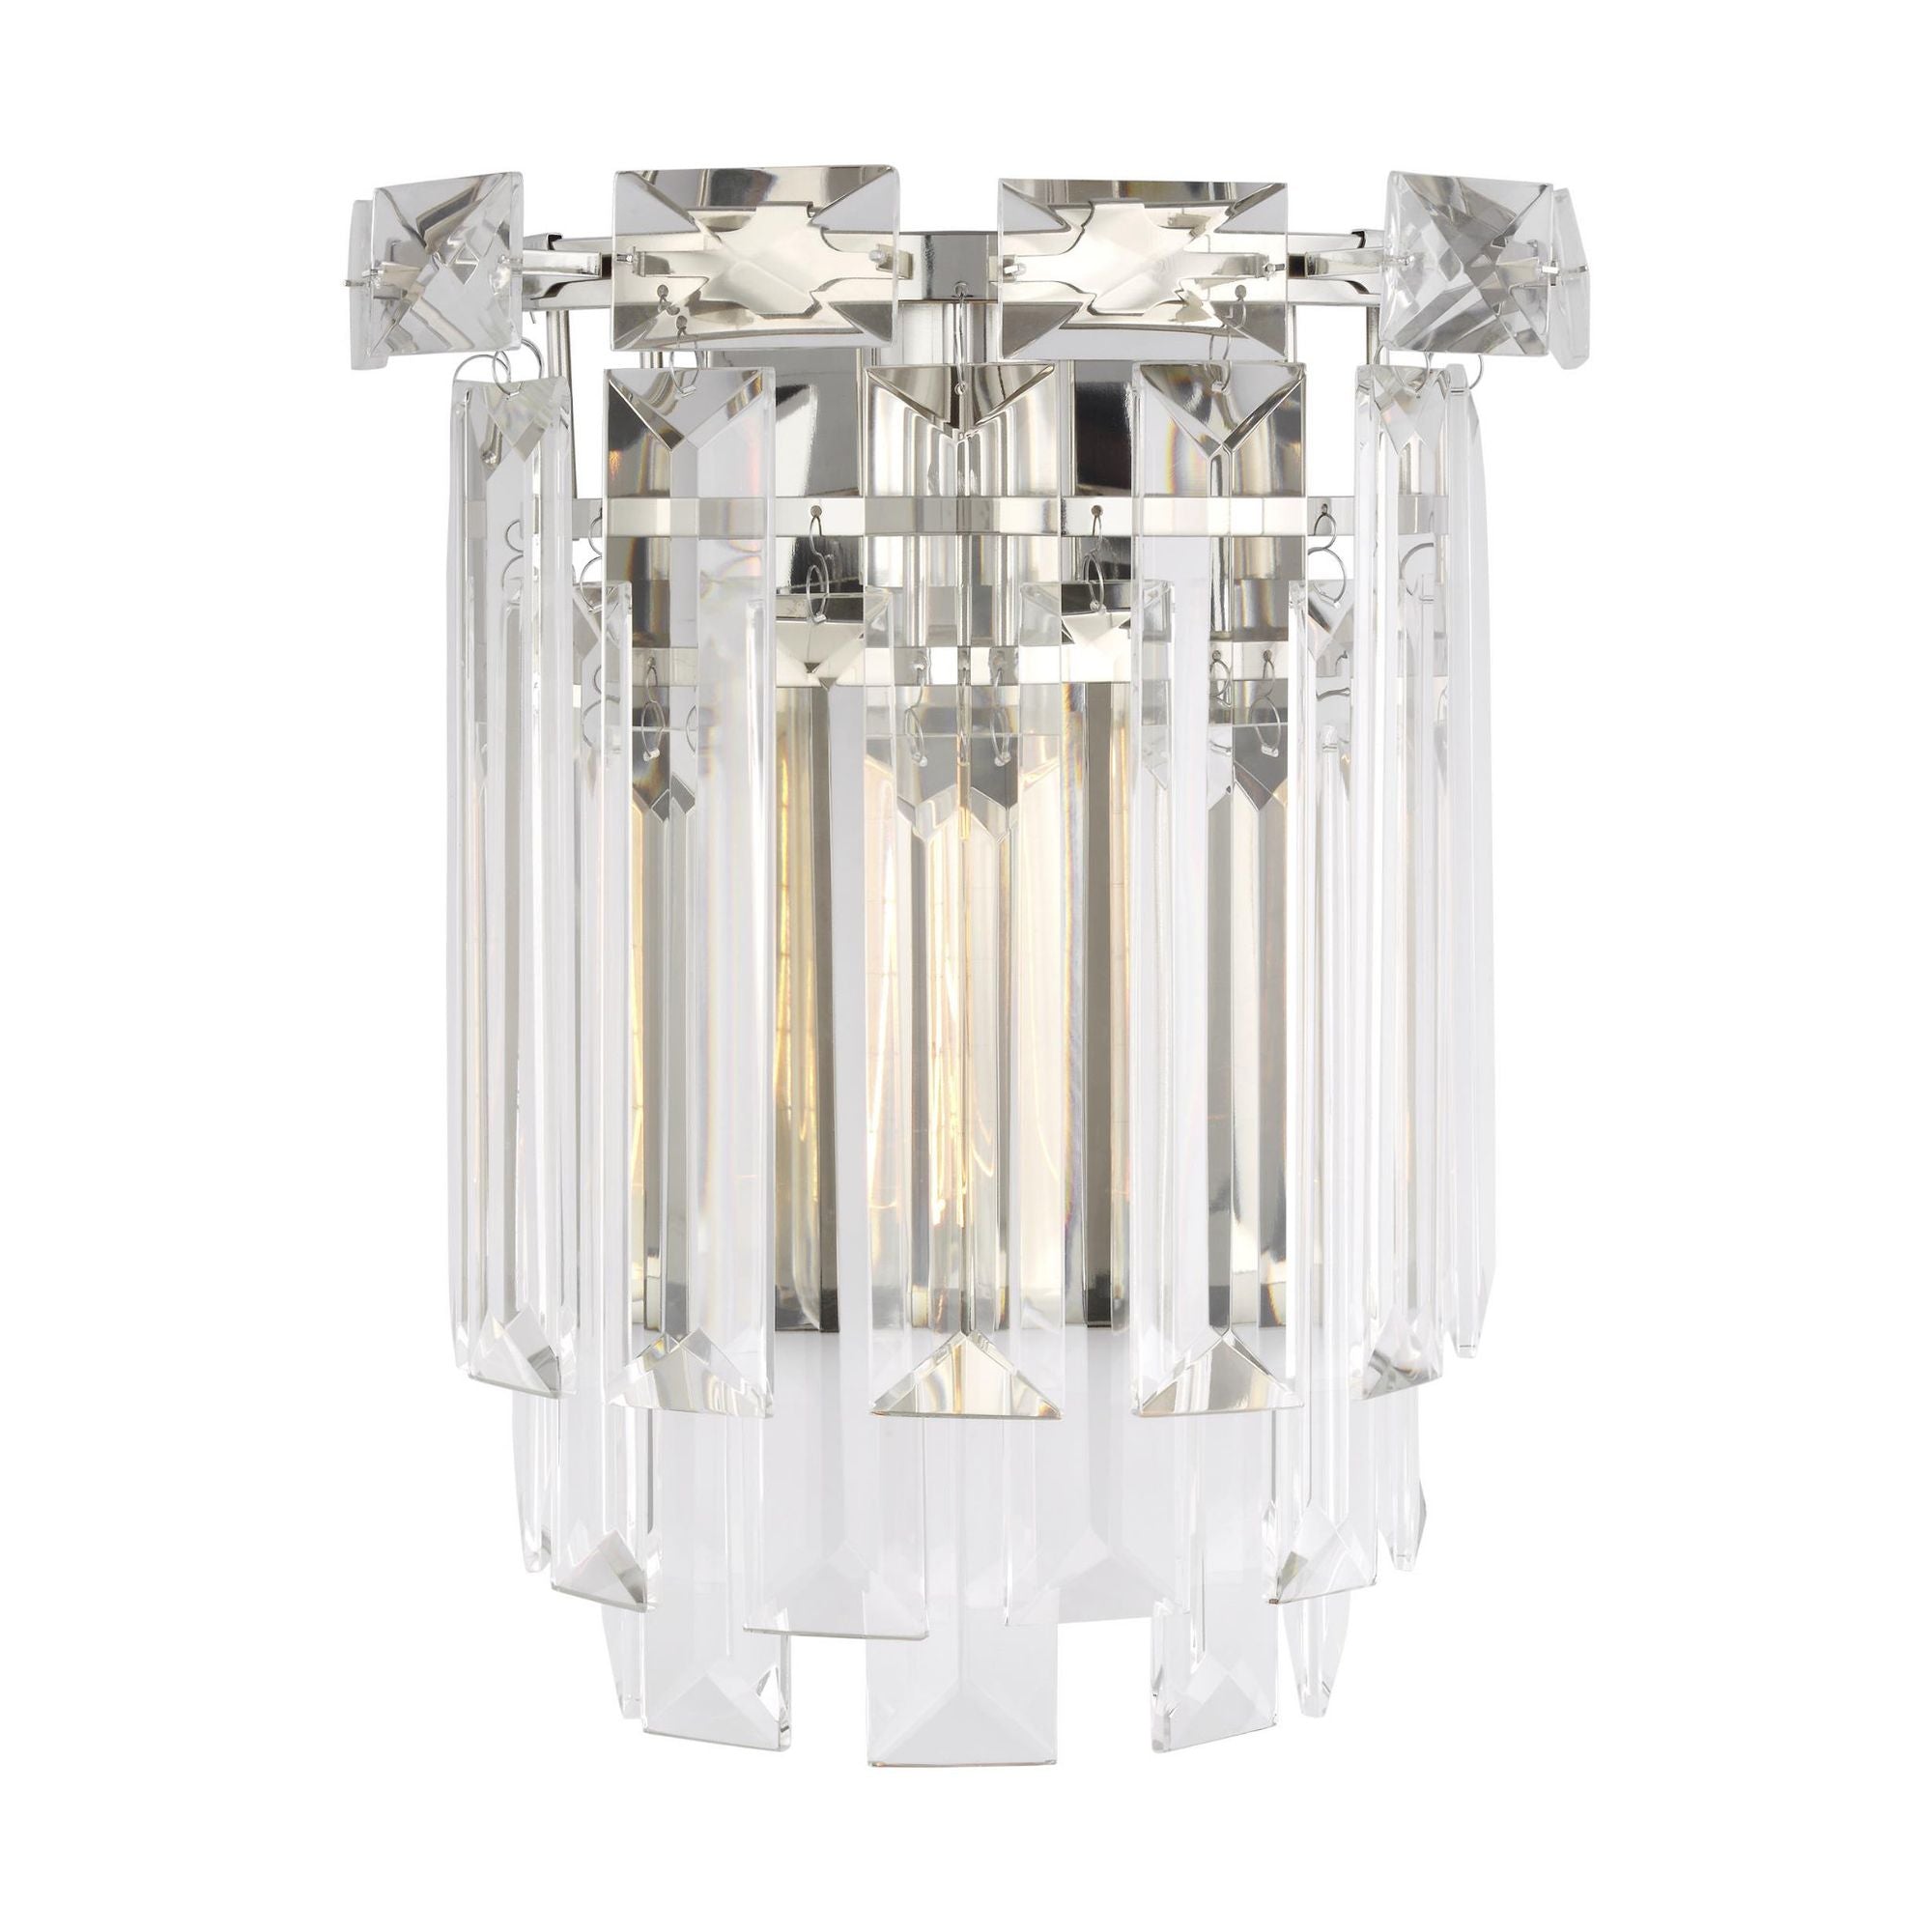 Chapman & Myers Arden Sconce in Polished Nickel